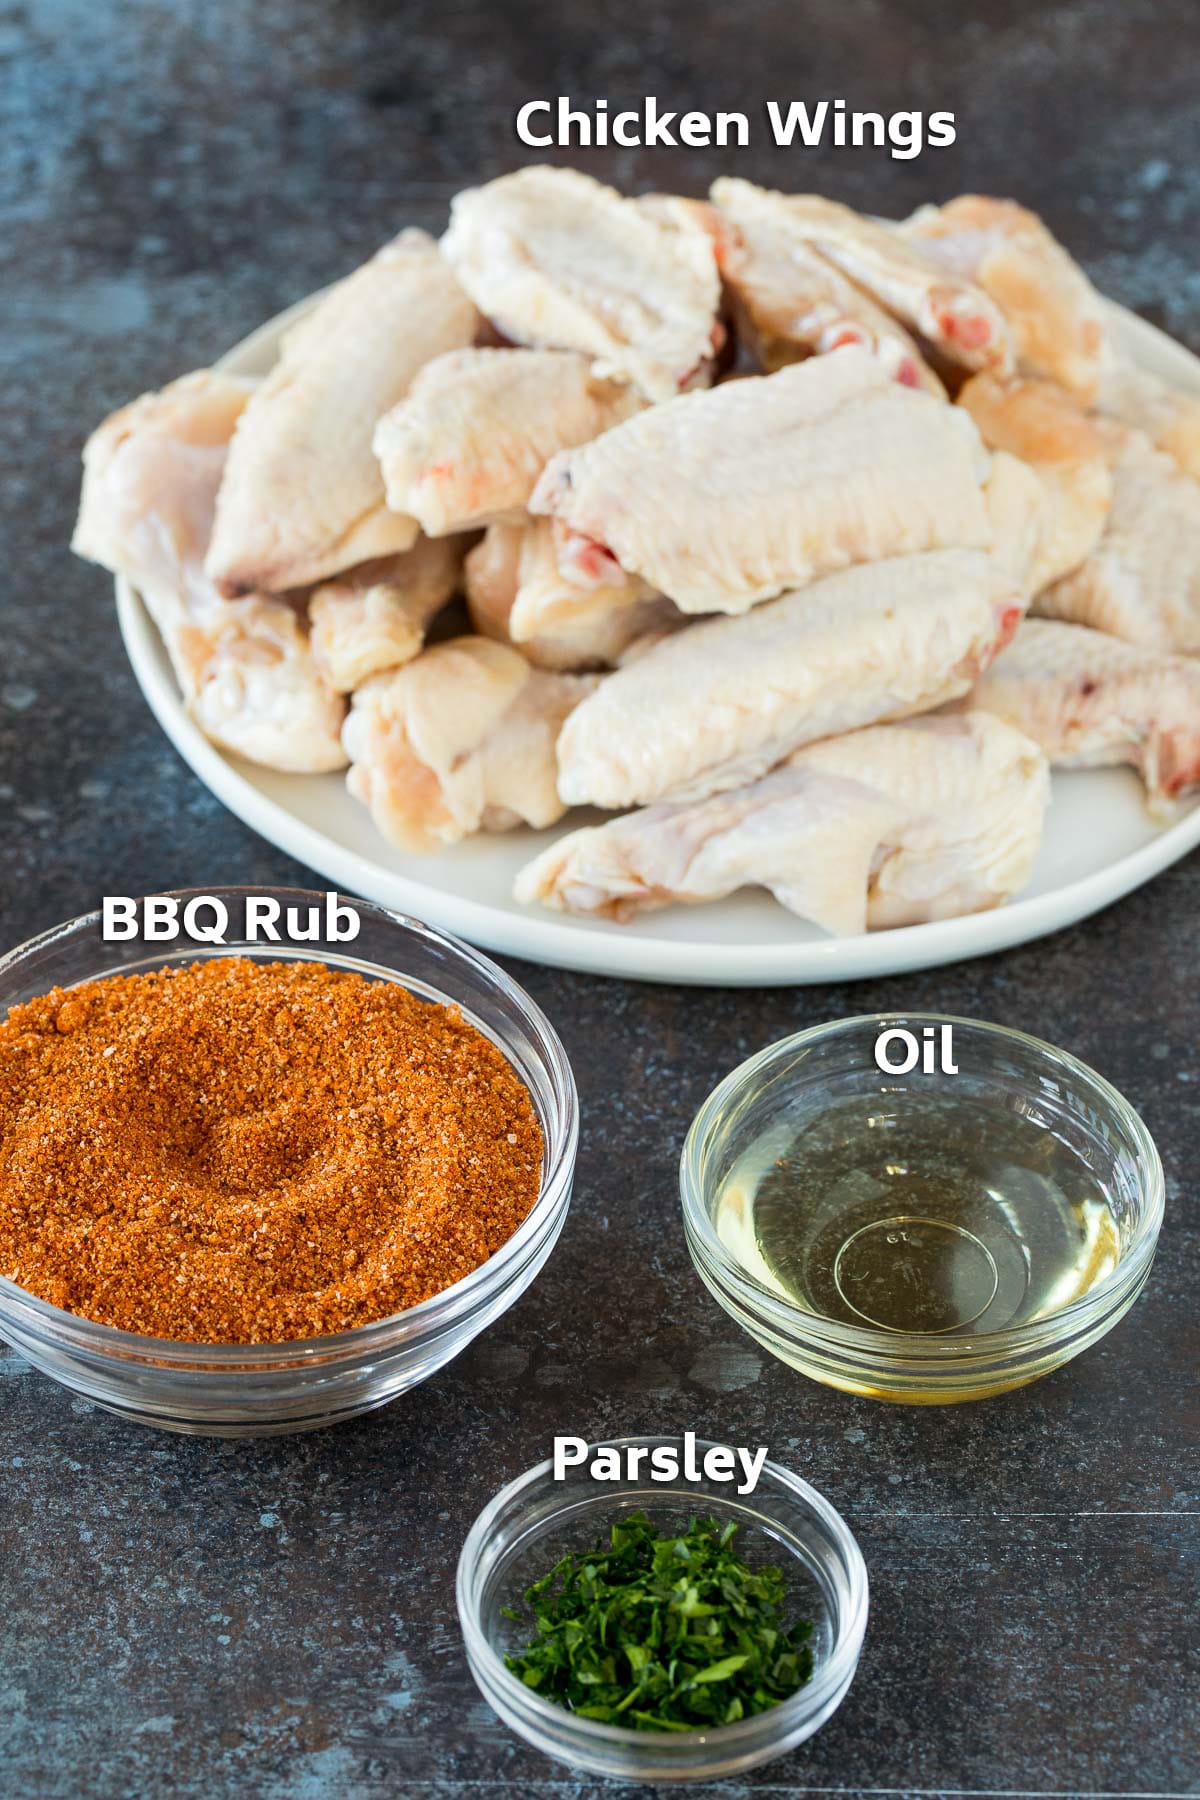 A plate of raw chicken and bowls of BBQ spice, parsley and oil.